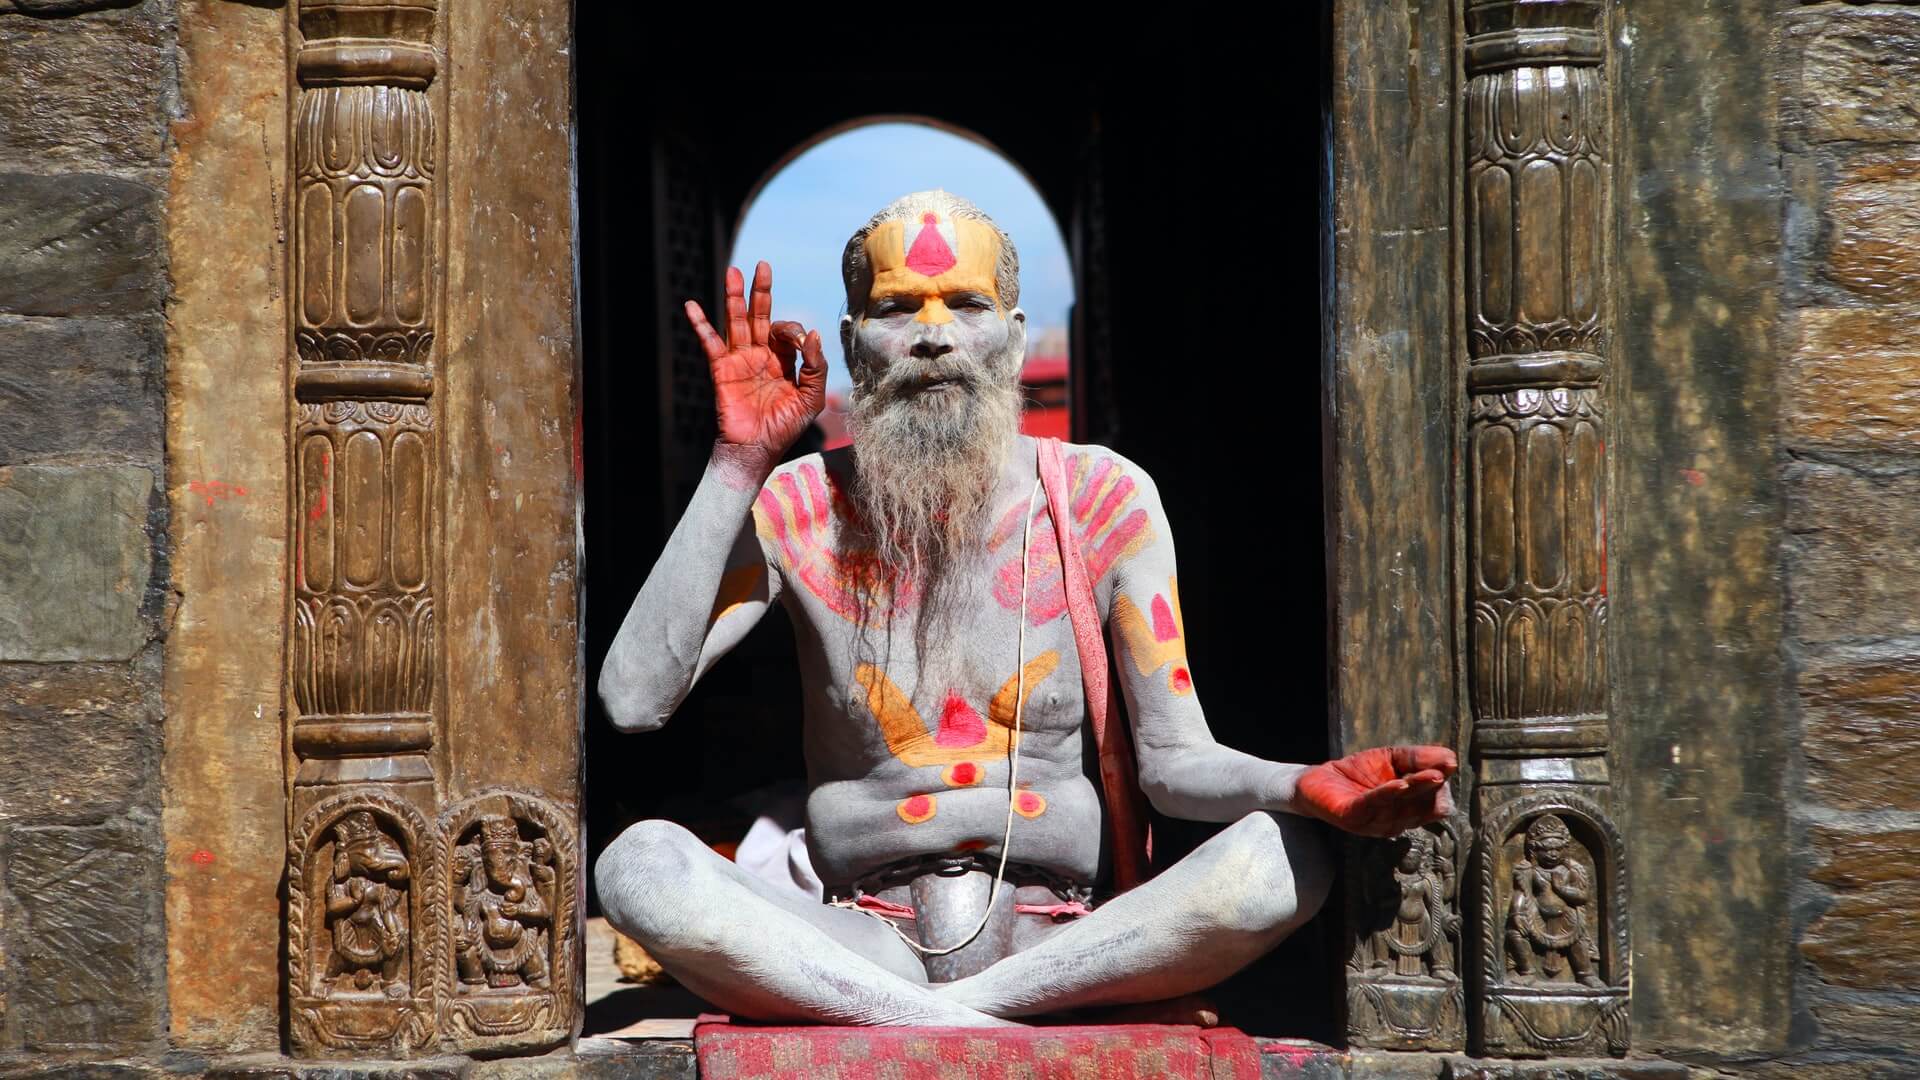 A sadhu in India giving the ok symbol over a well executed drug tourism guide